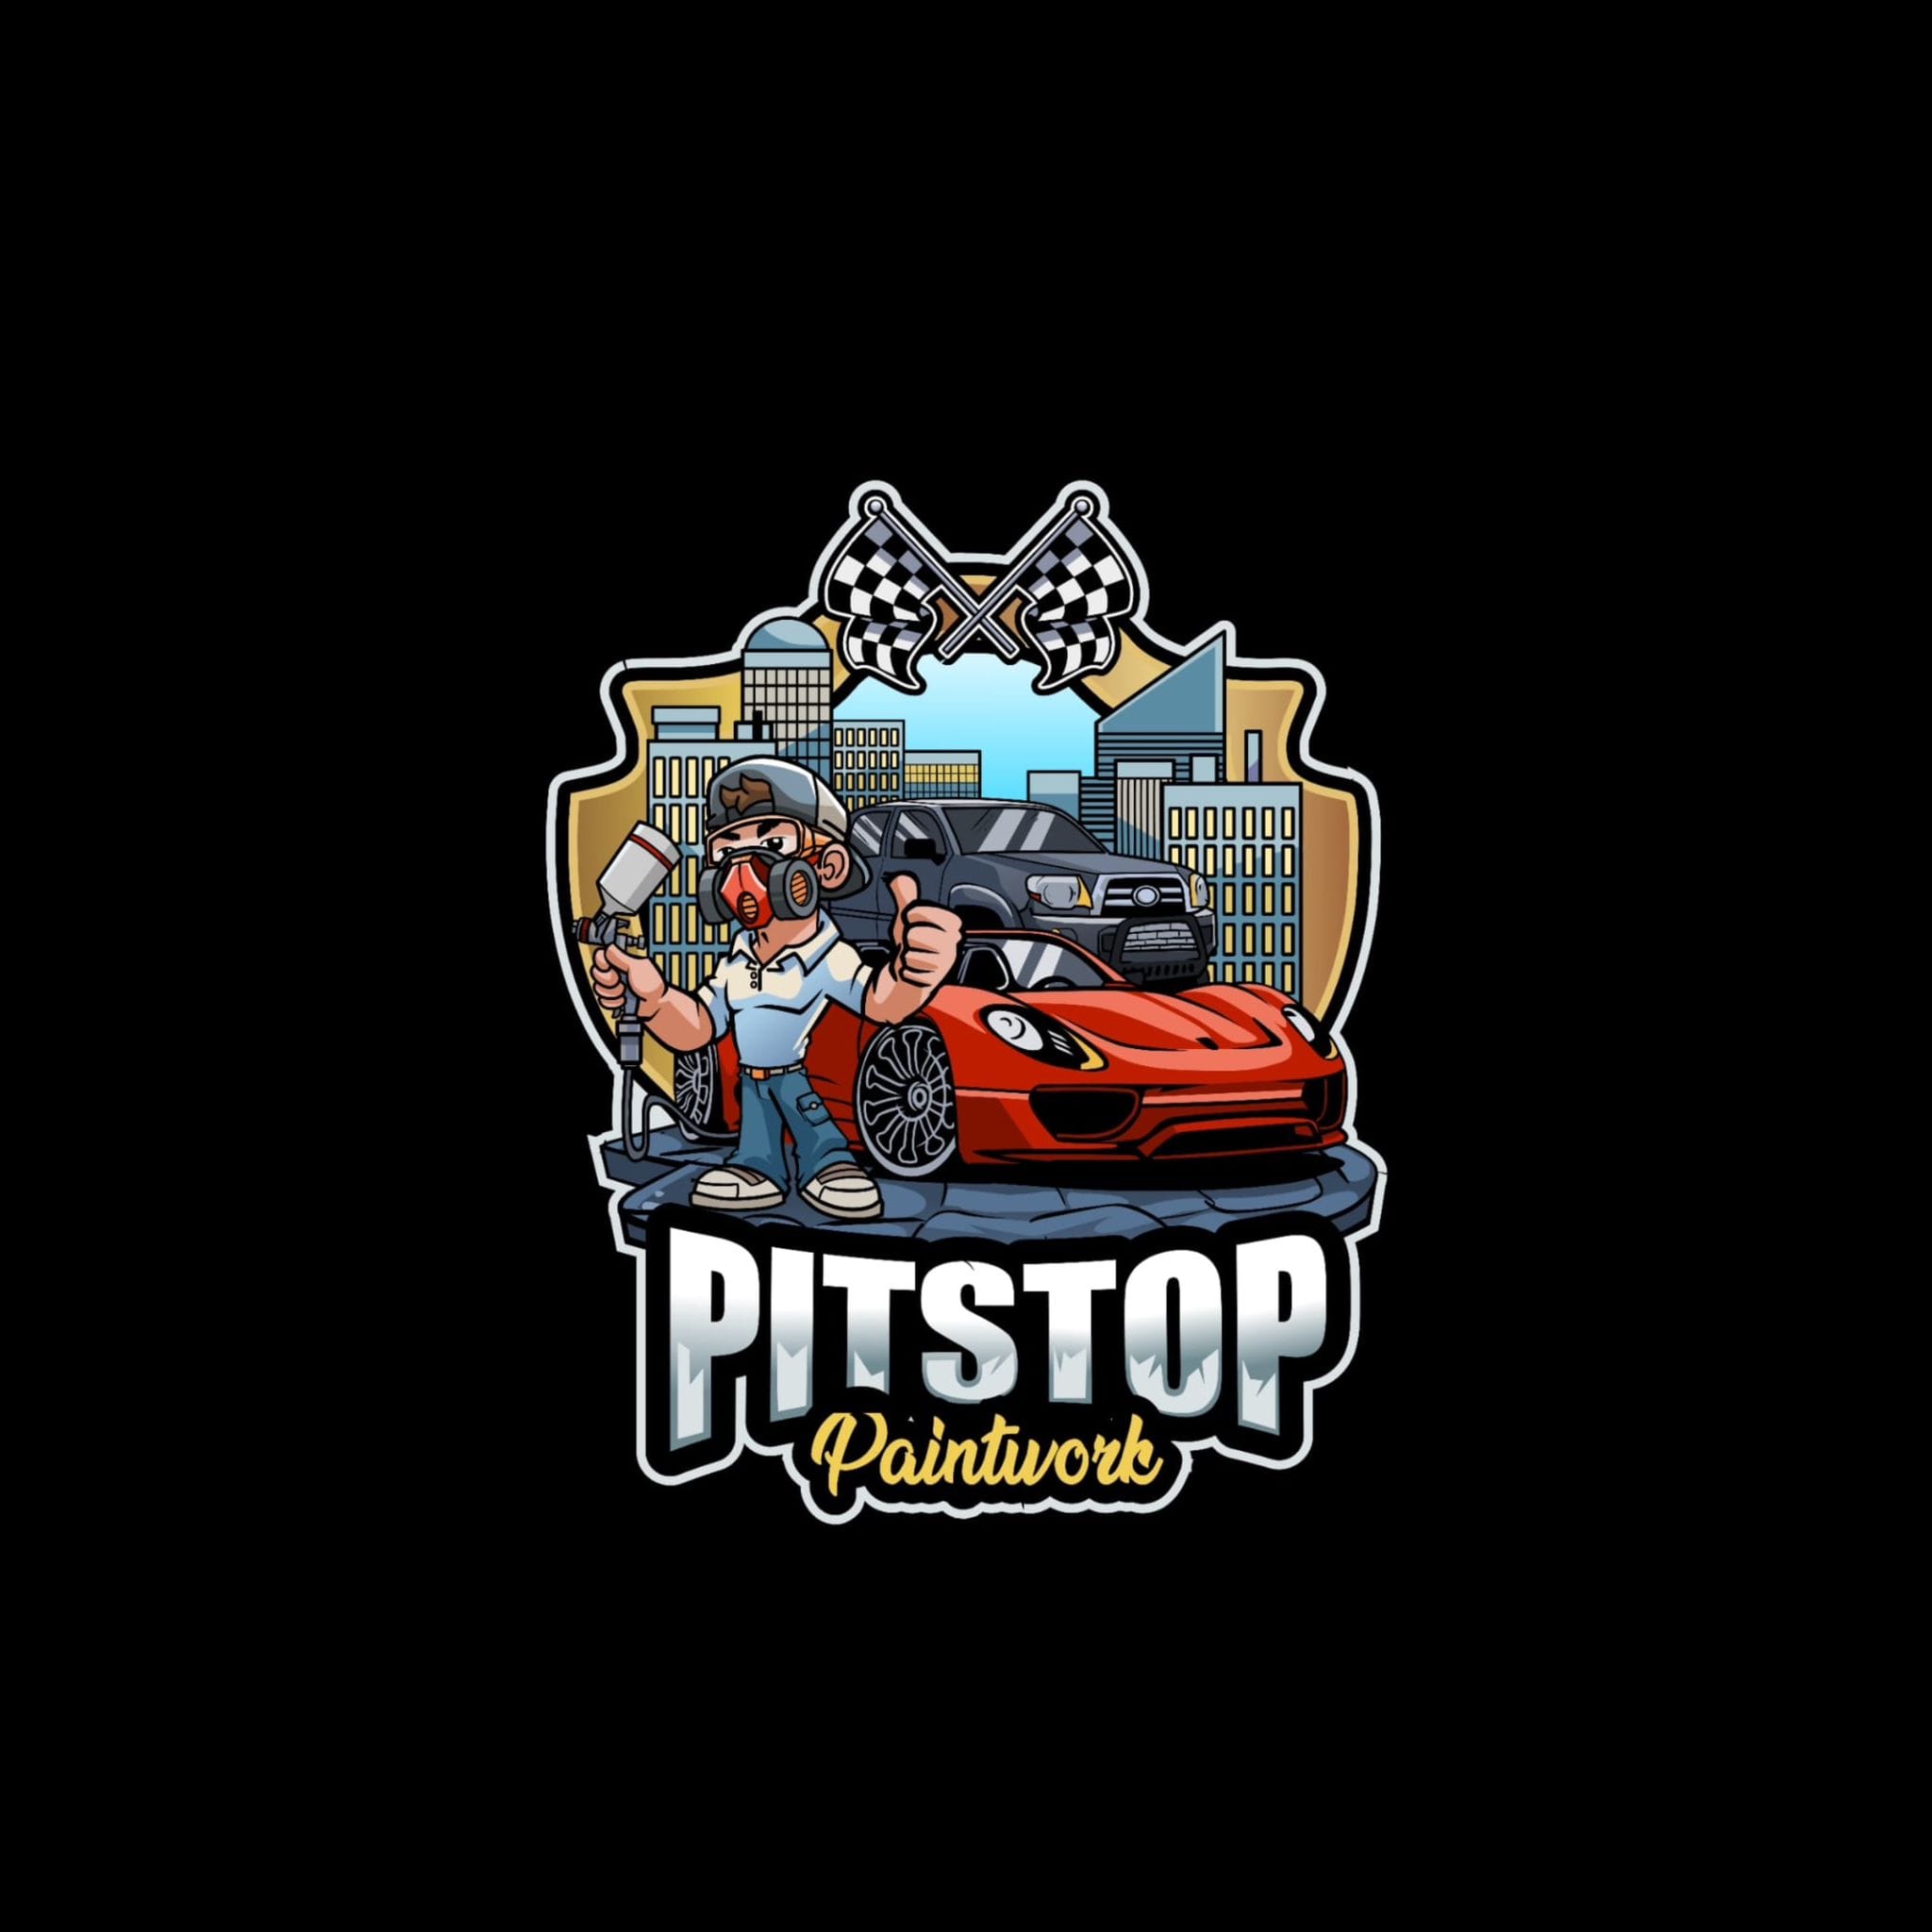 This is the logo for Pitstop Paintwork